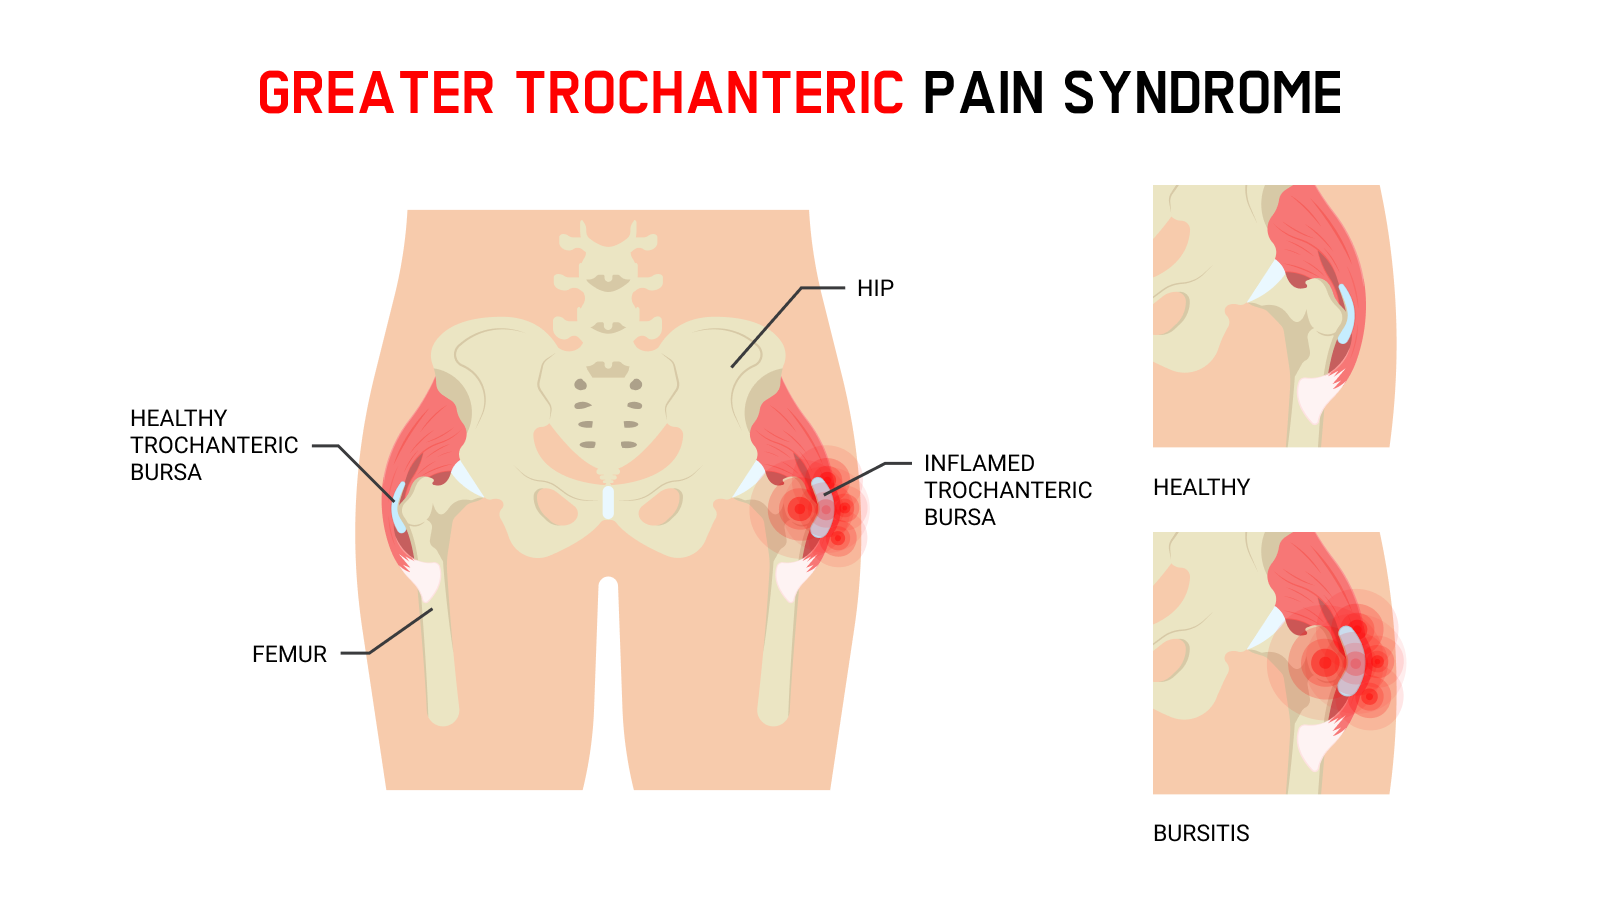 Greater trochanteric pain syndrome